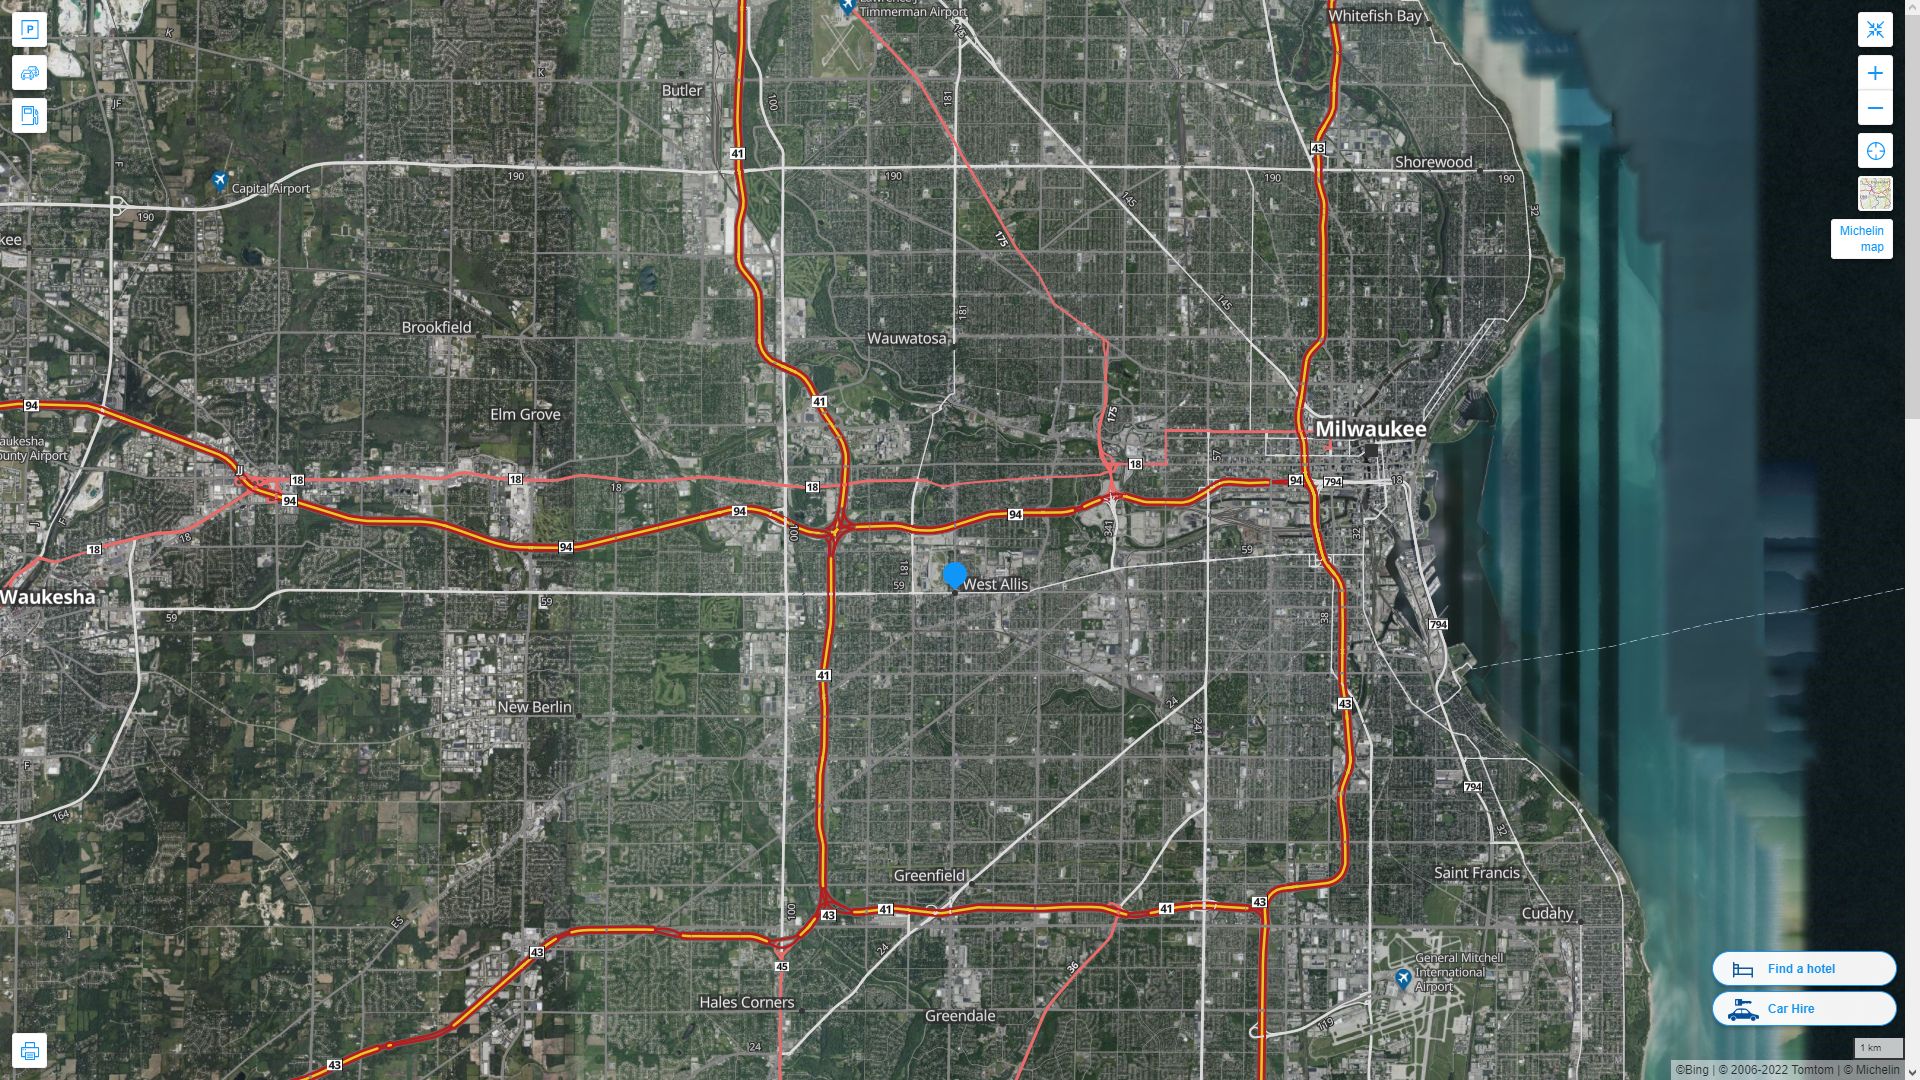 West Allis Wisconsin Highway and Road Map with Satellite View